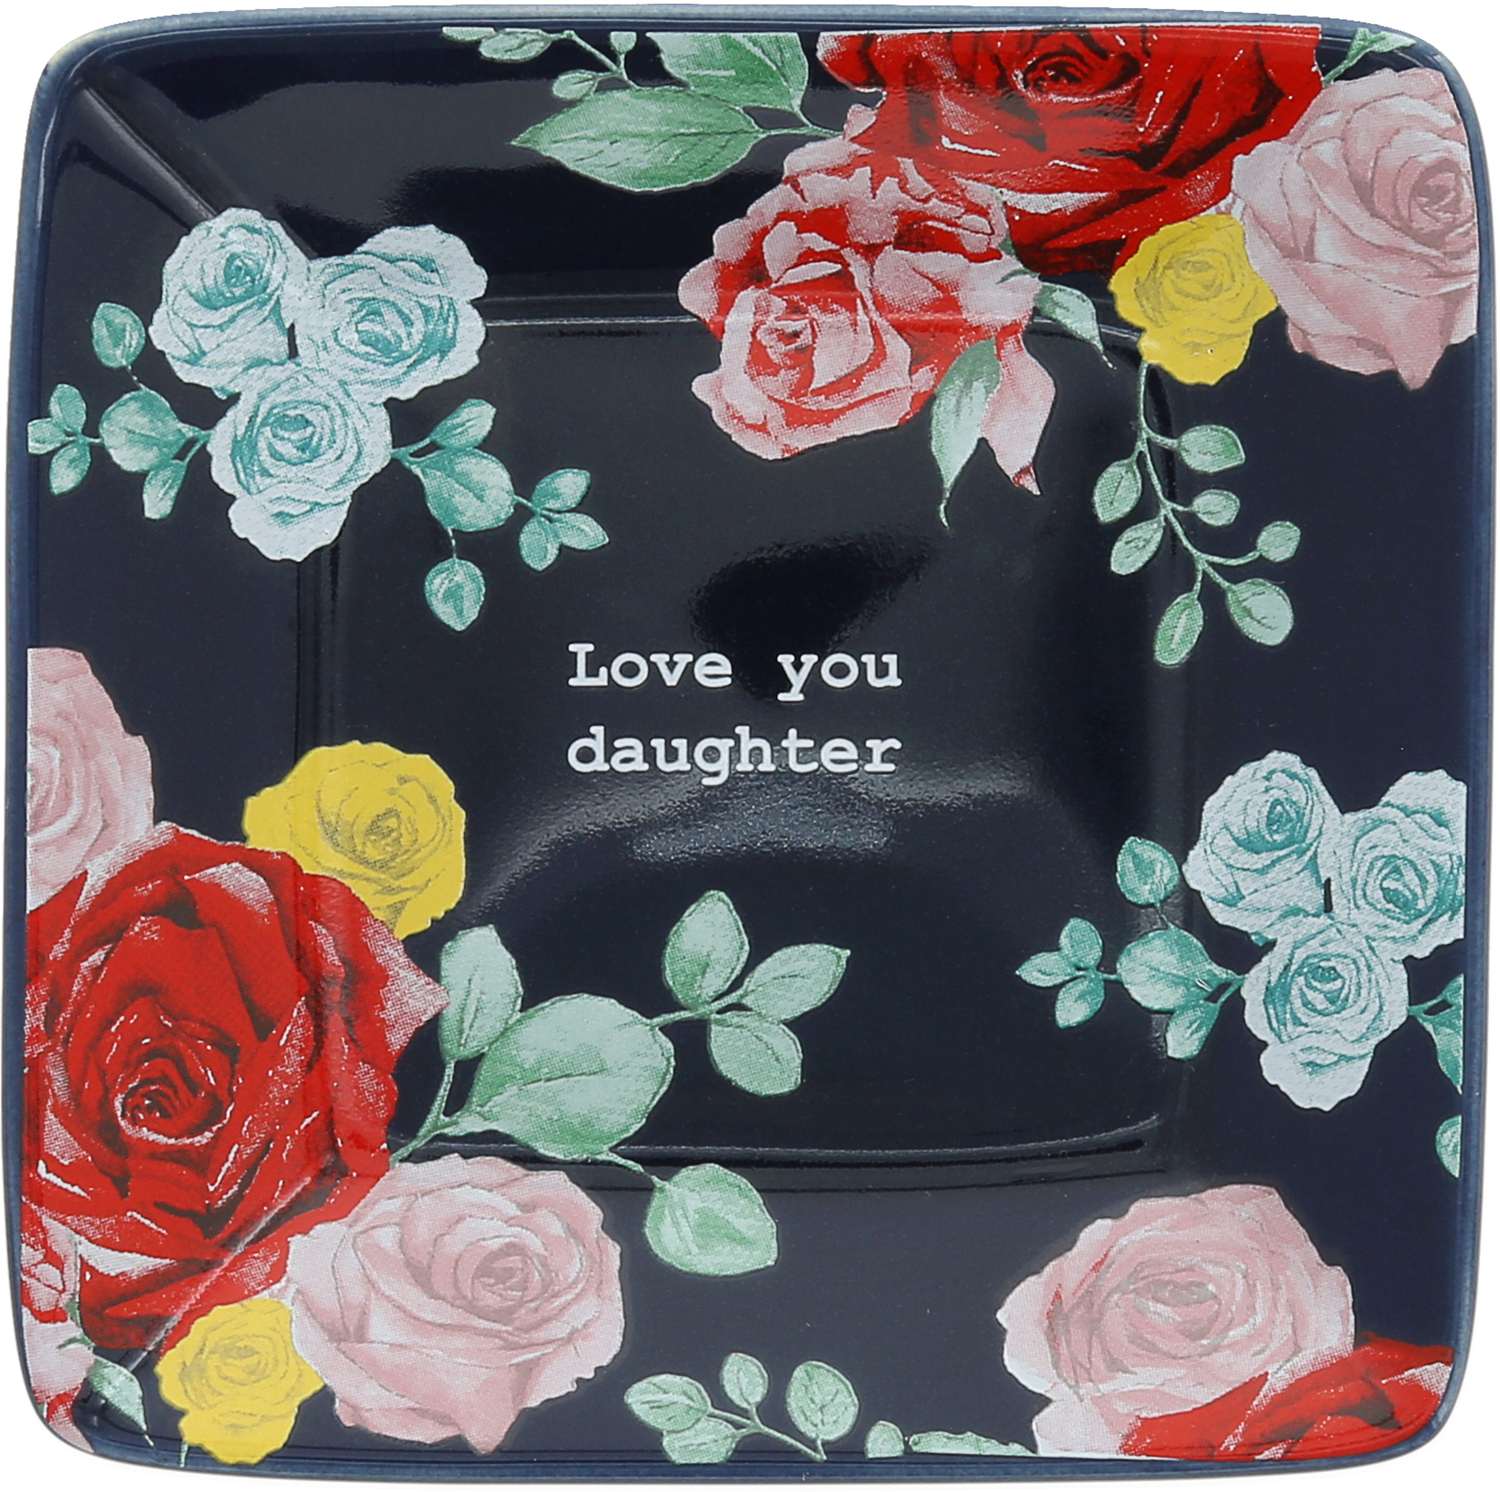 Daughter by Crumble and Core - Daughter - 3.5" Keepsake Dish